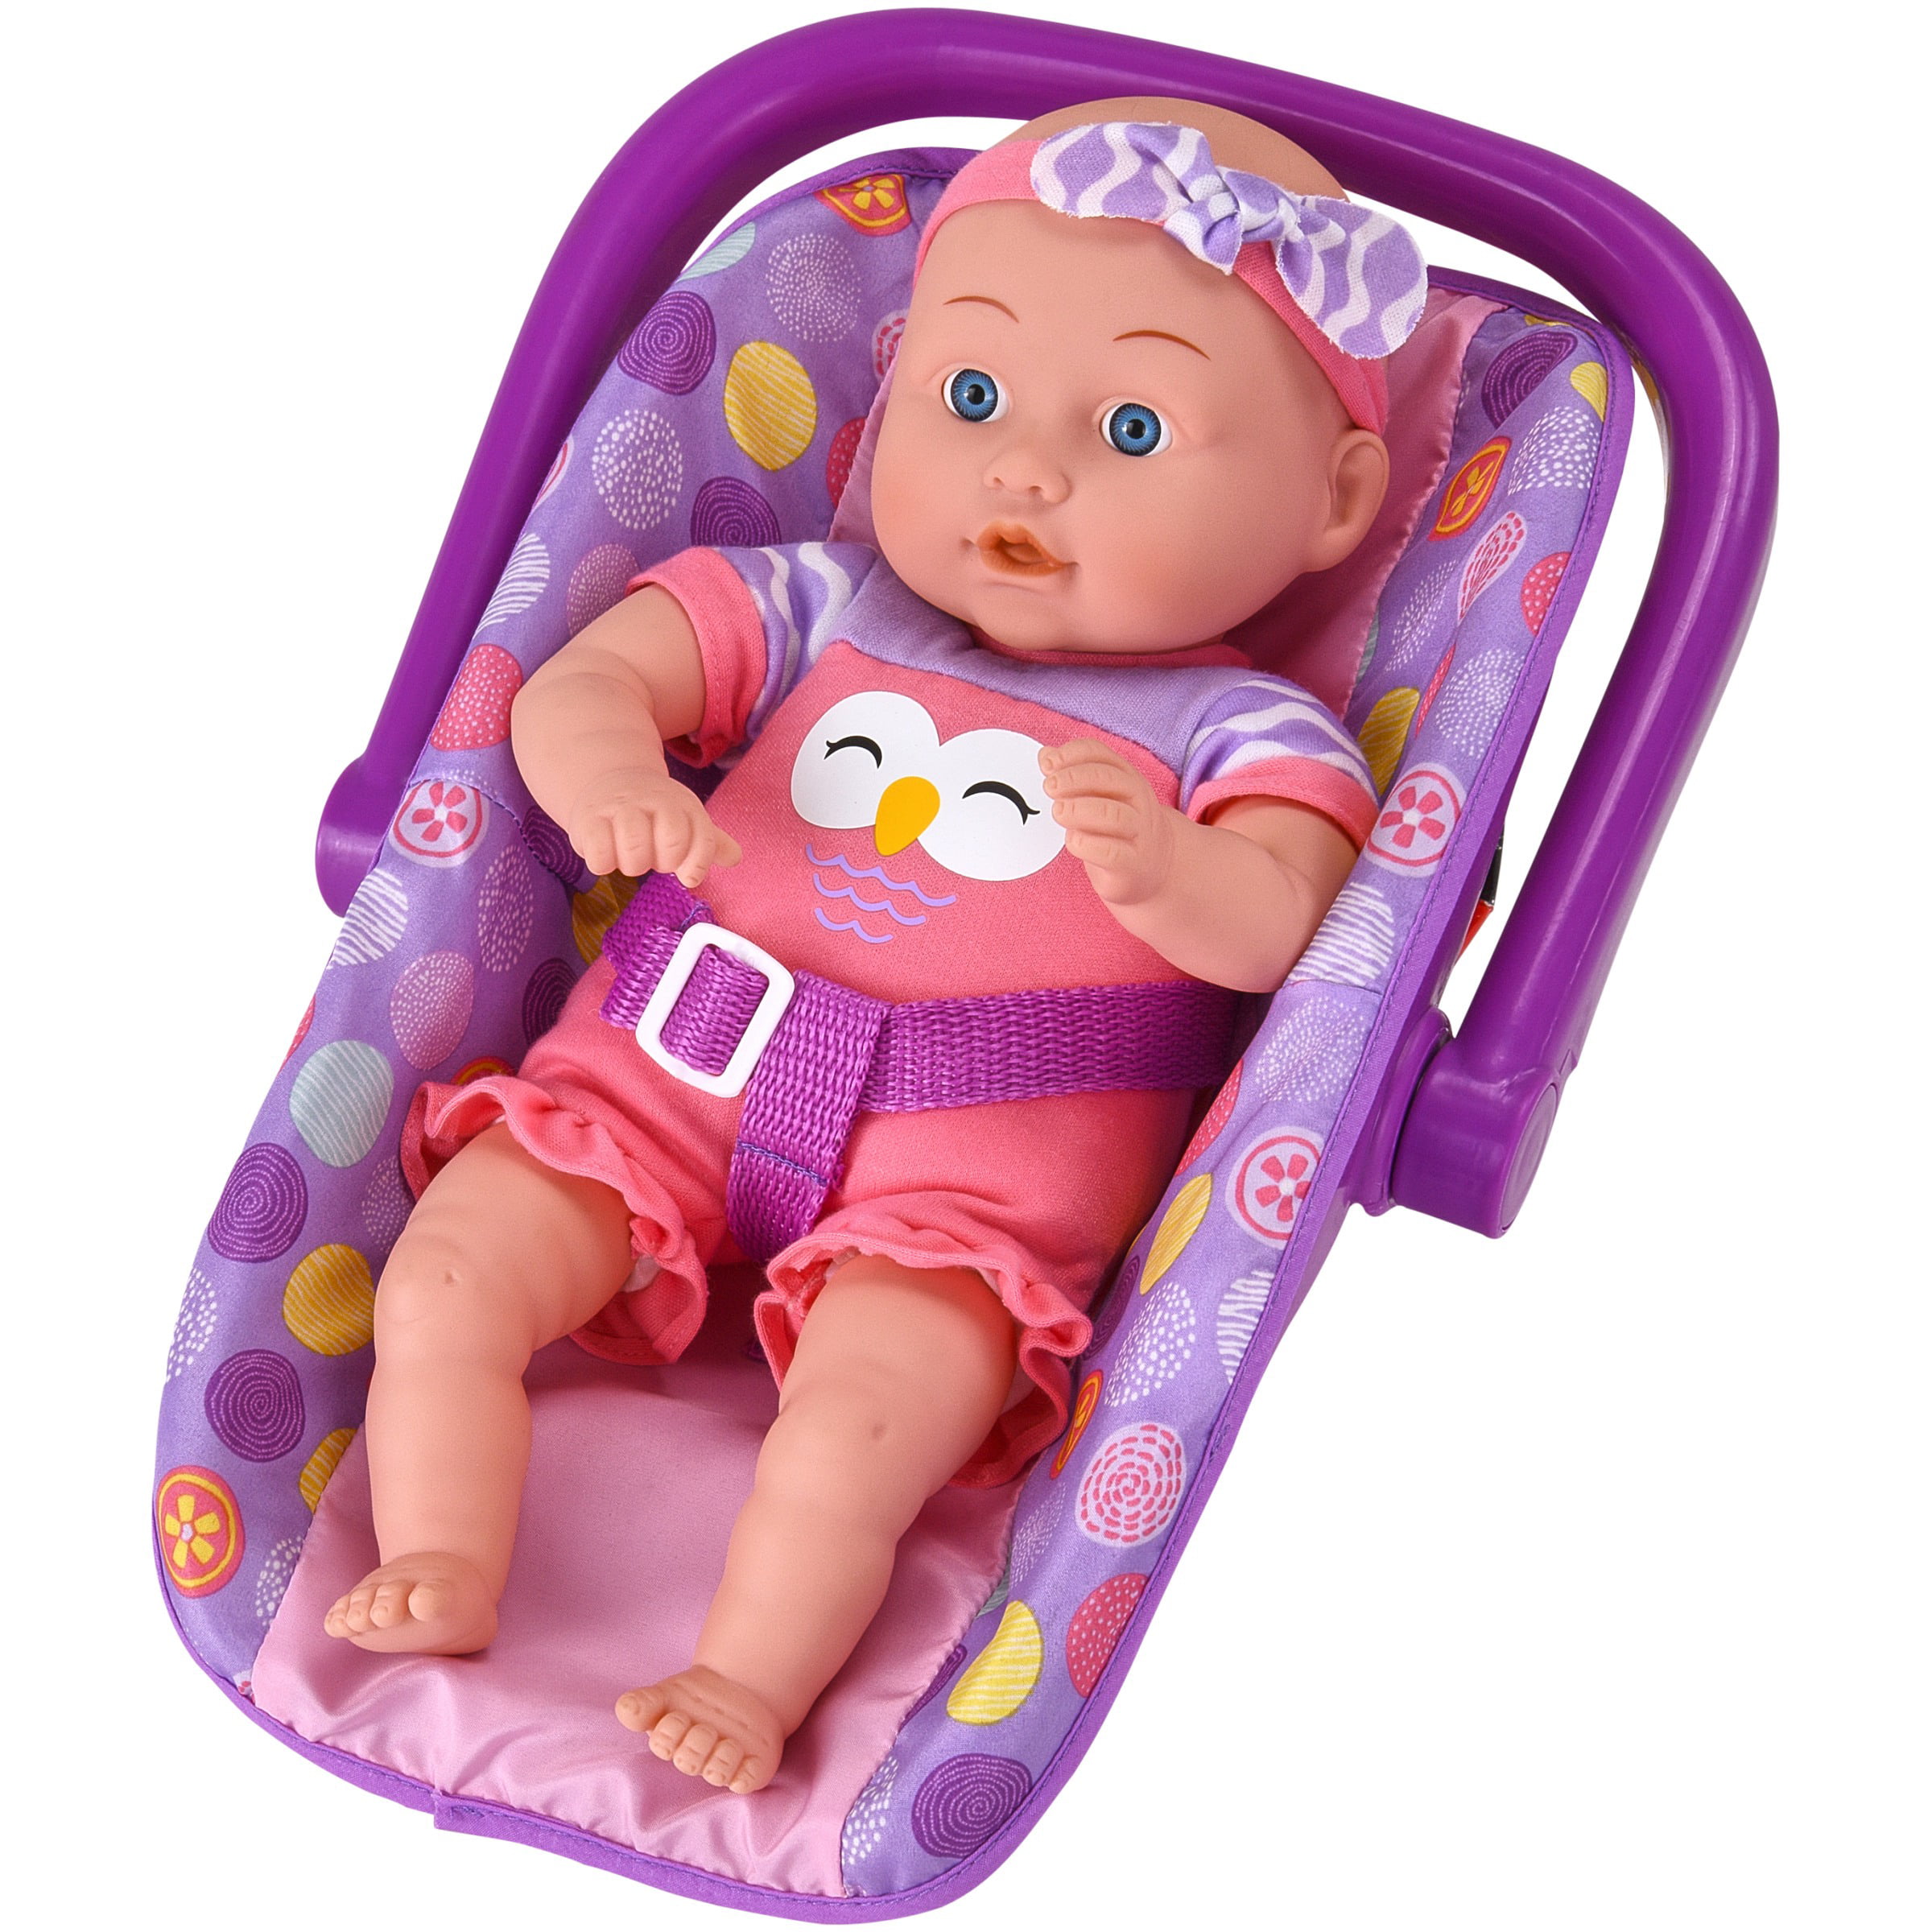 Portable Pink Dots Carrier Seat 12Inch Baby Doll Accessory for Children Toys